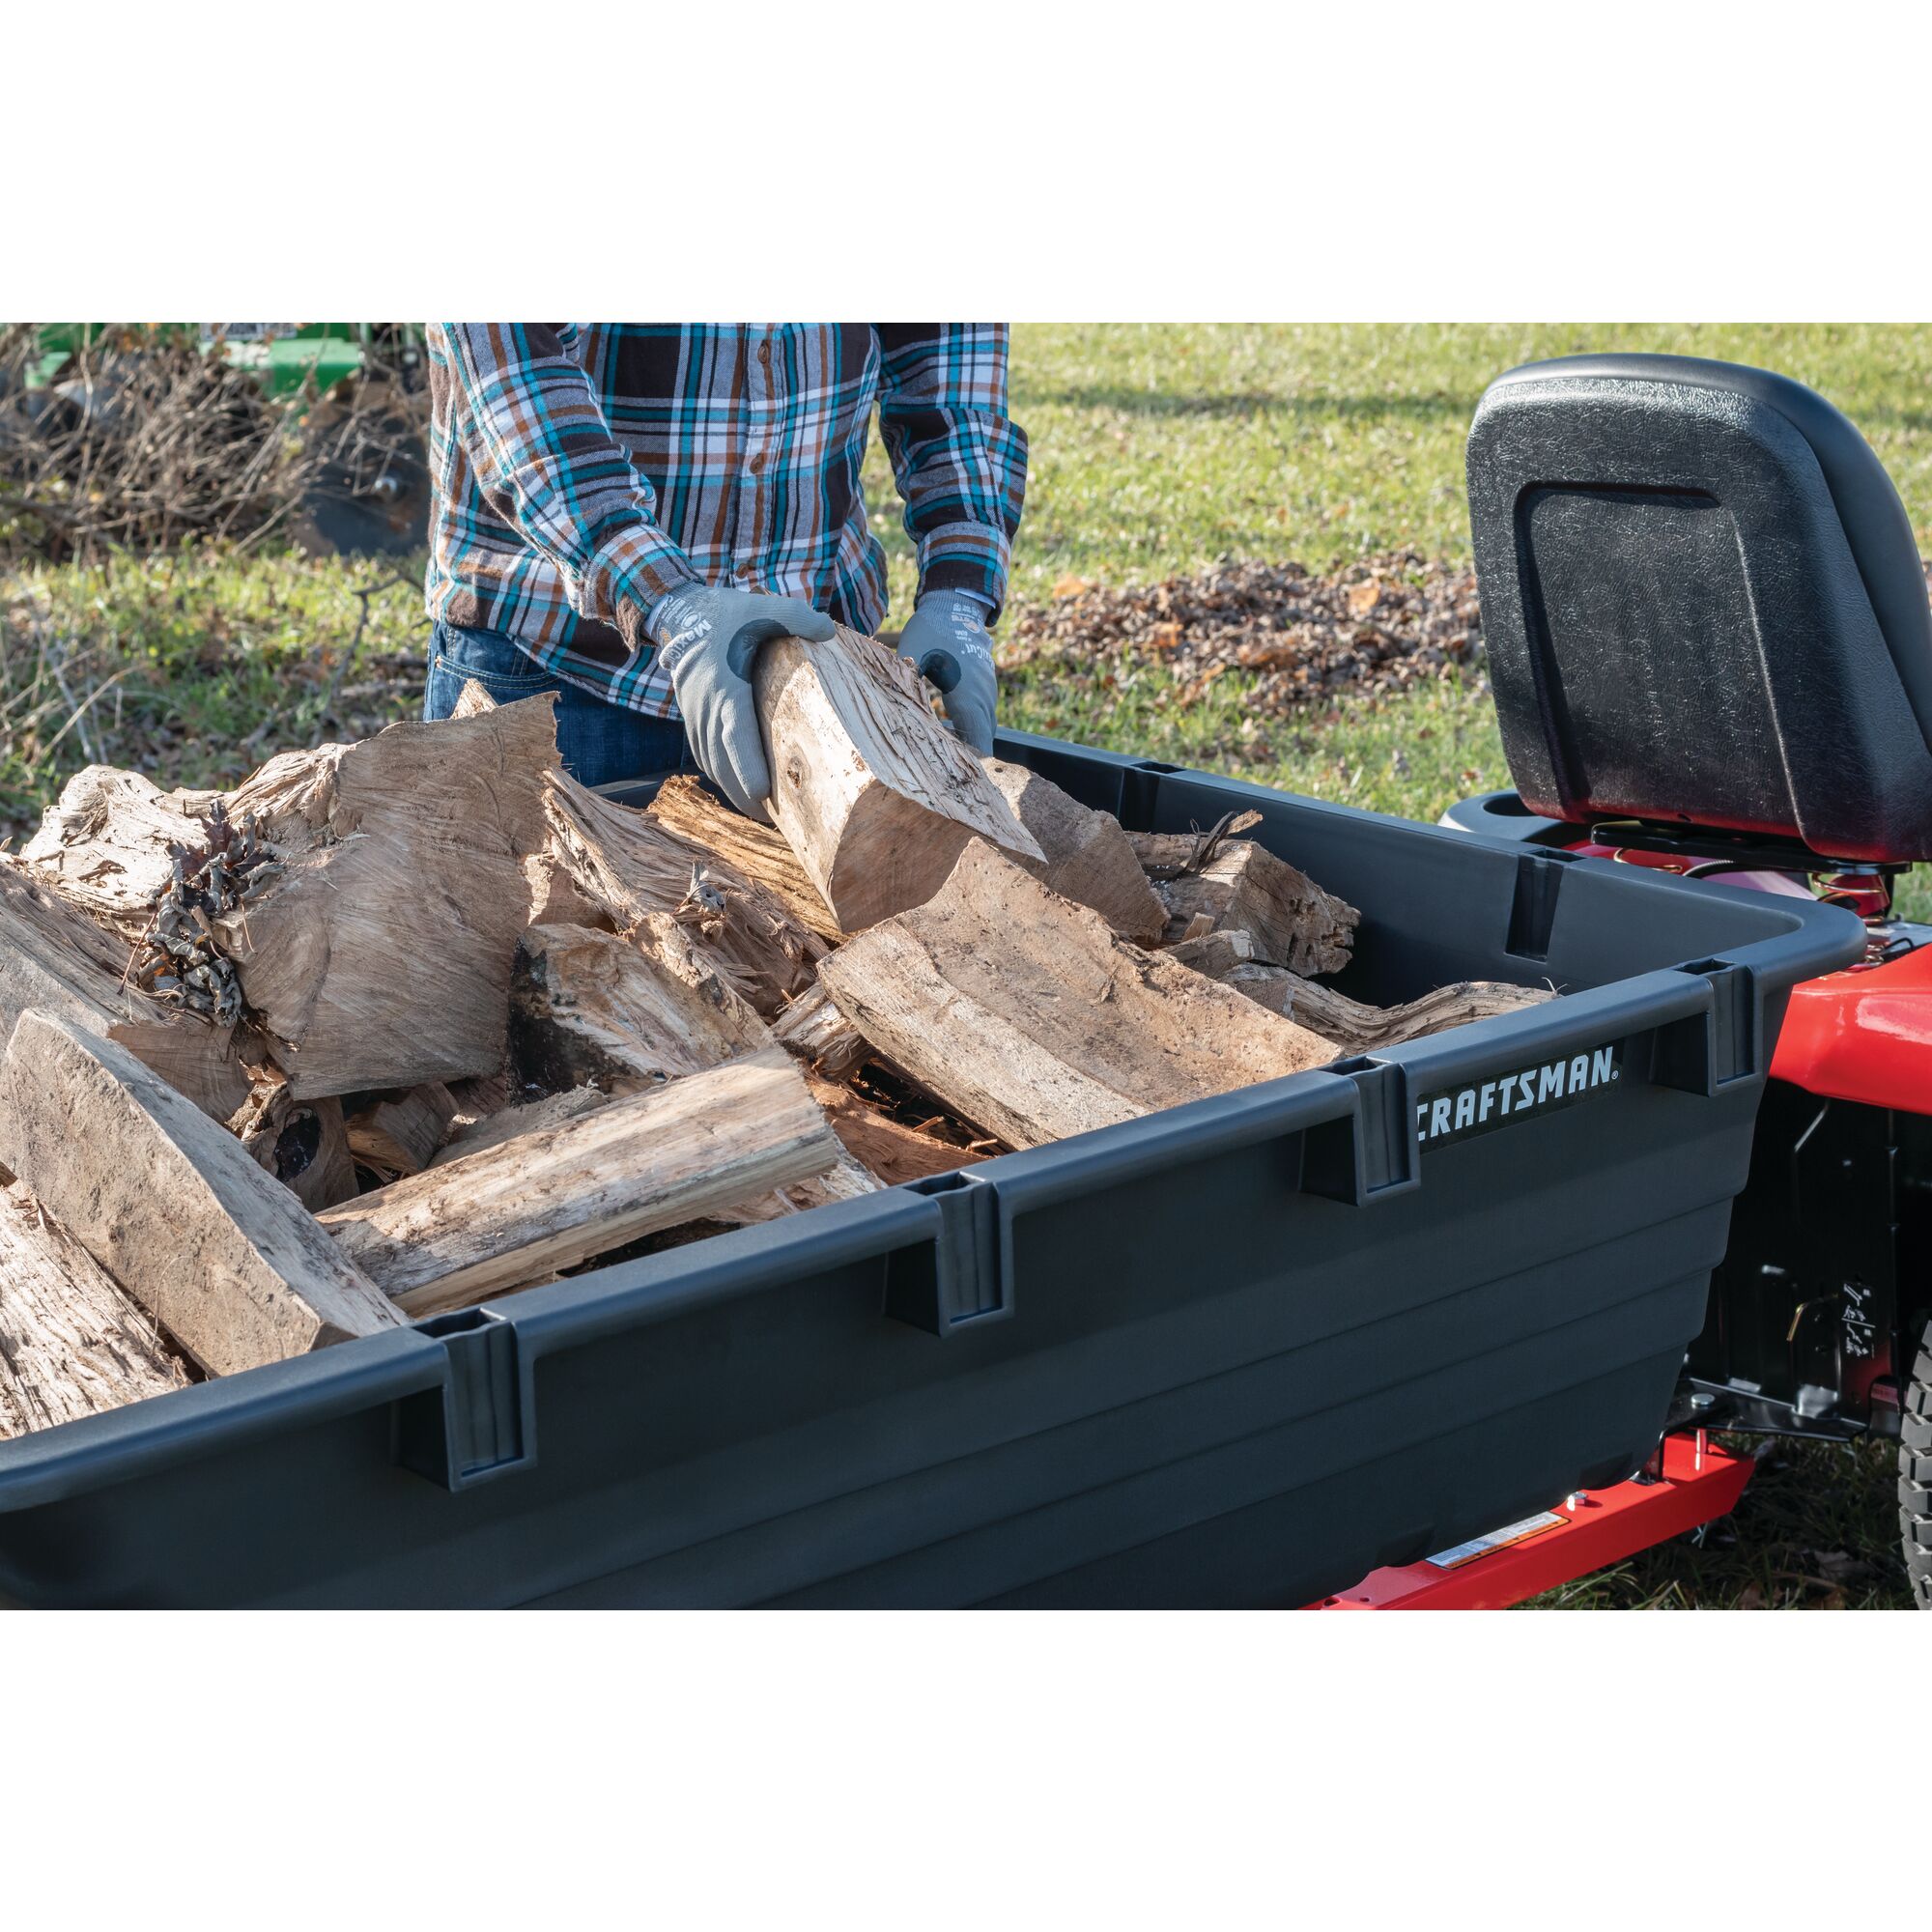 17 cubic foot poly cart being used to load wooden logs.